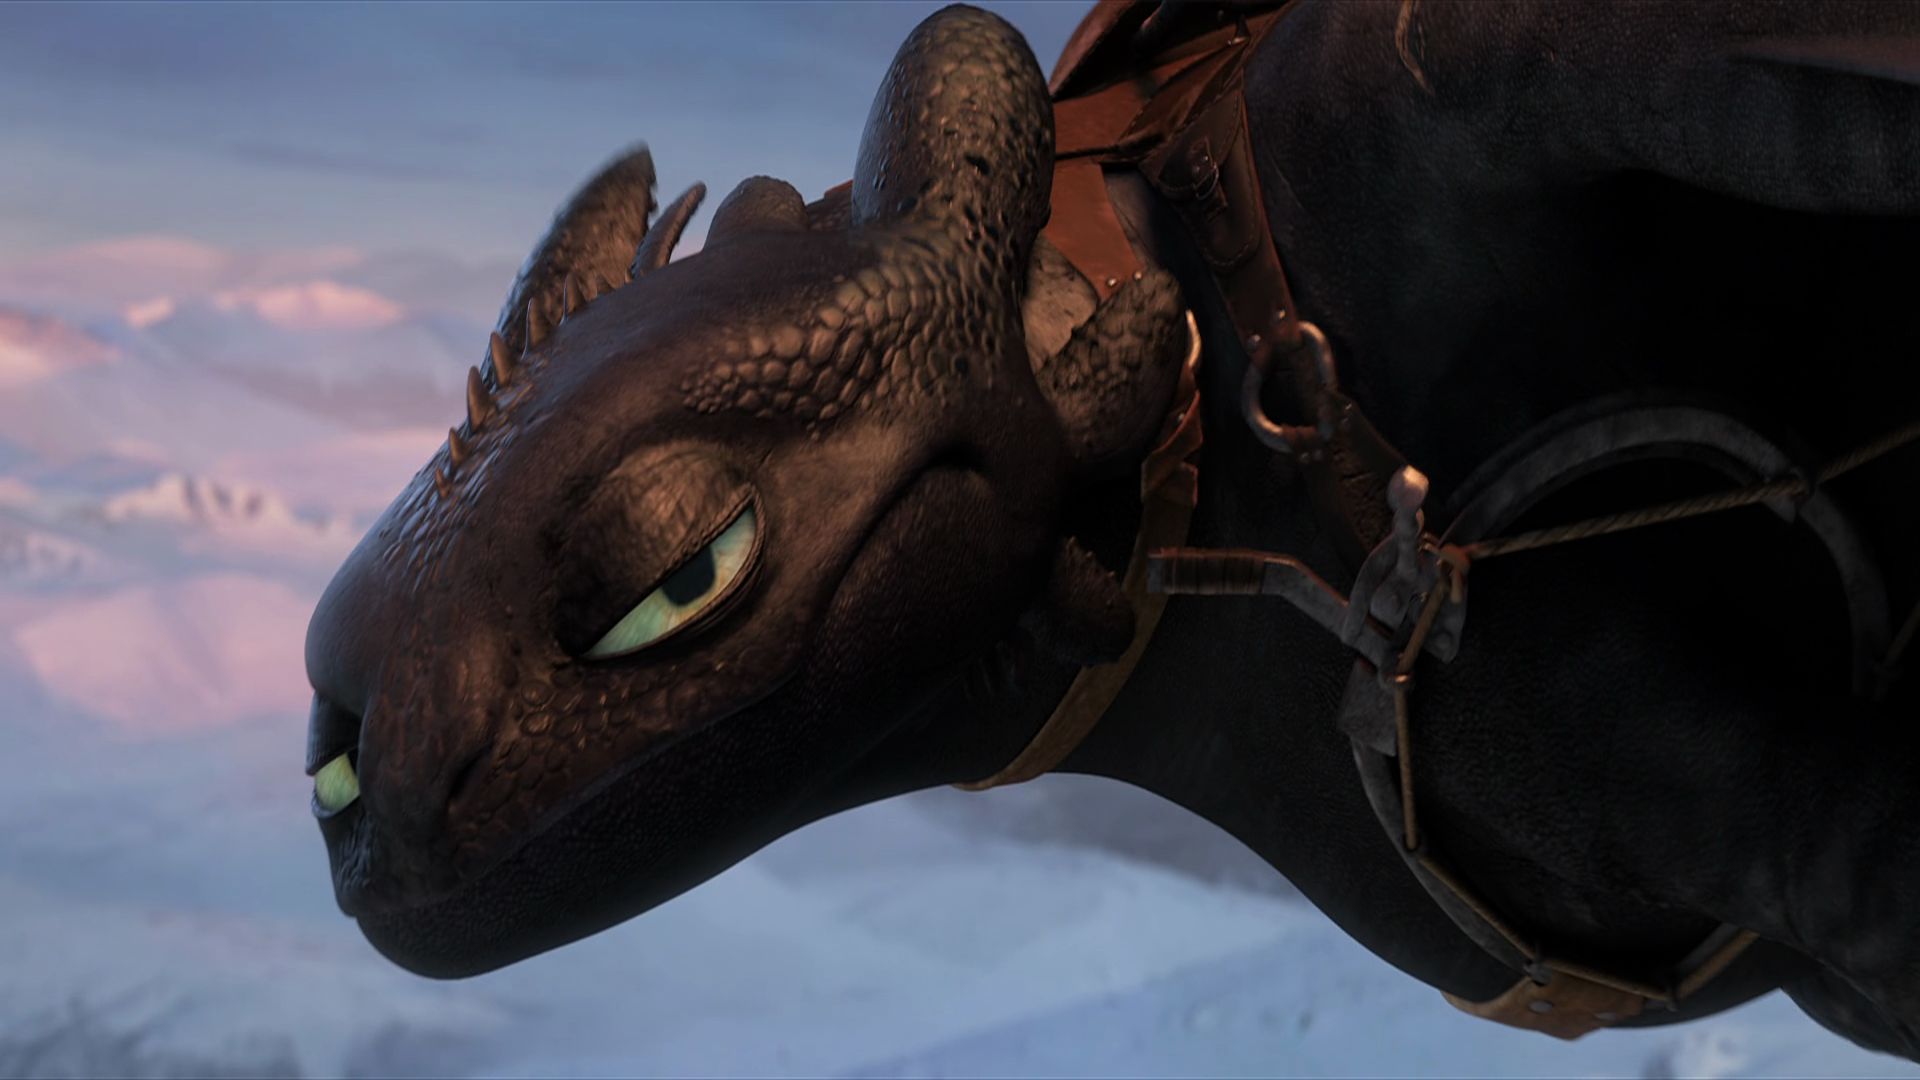 toothless (how to train your dragon), how to train your dragon, movie, how to train your dragon 2